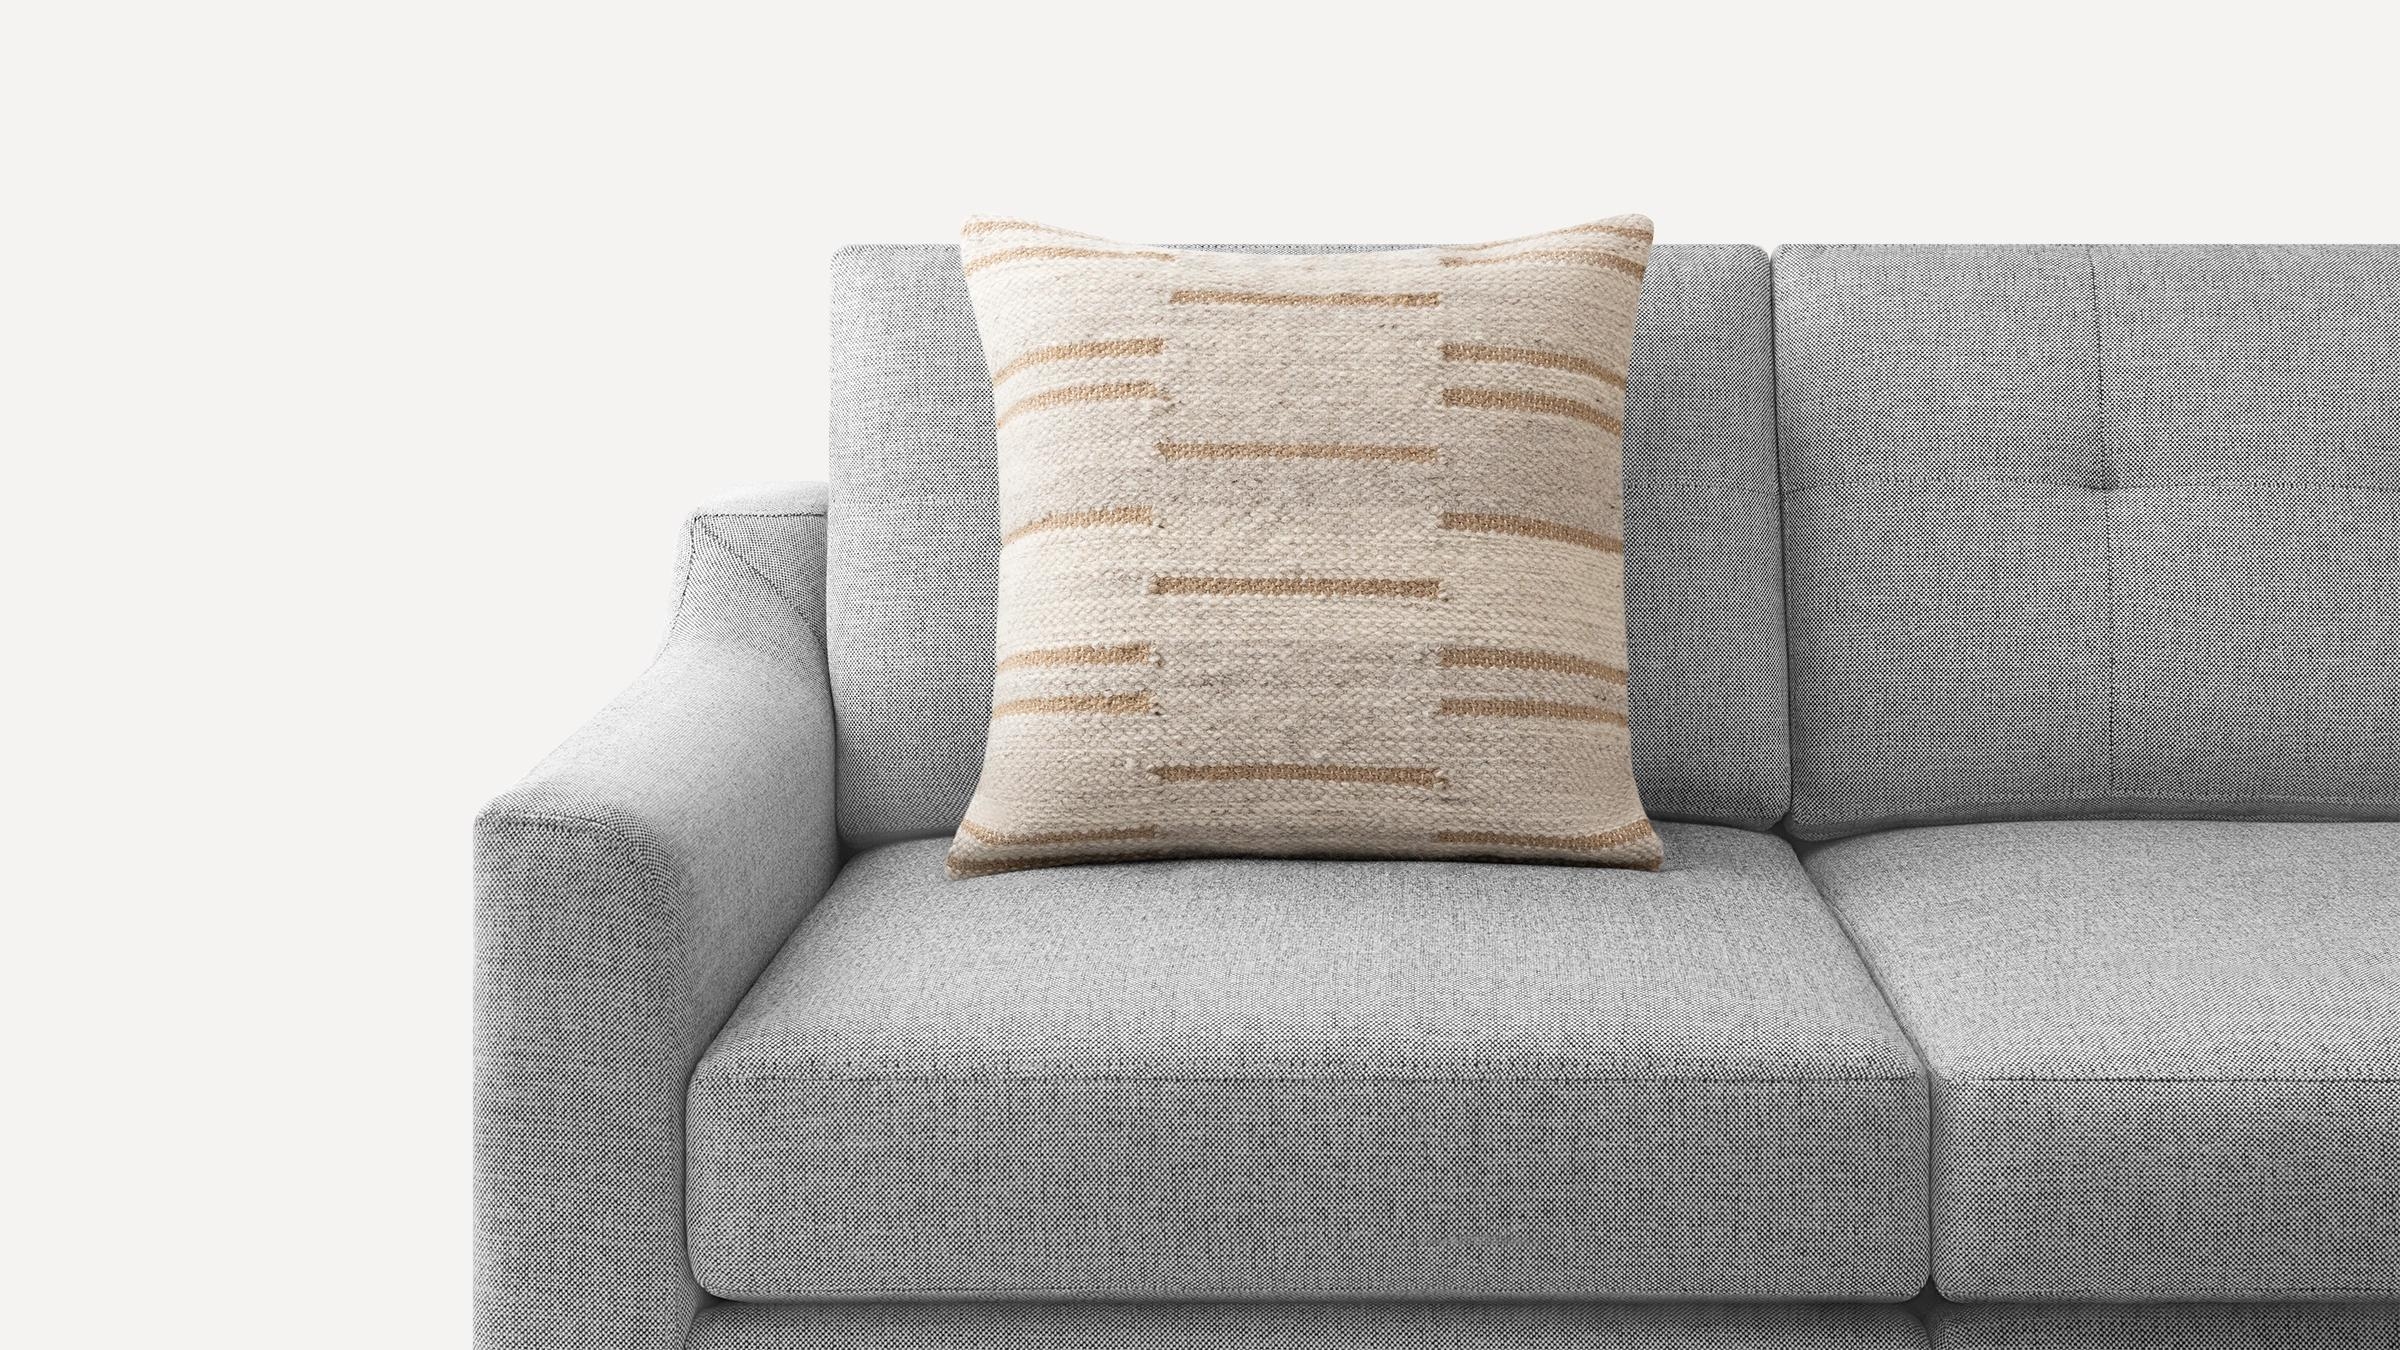 Interval Hand-tufted Pillow Cover in Beige - Image 1